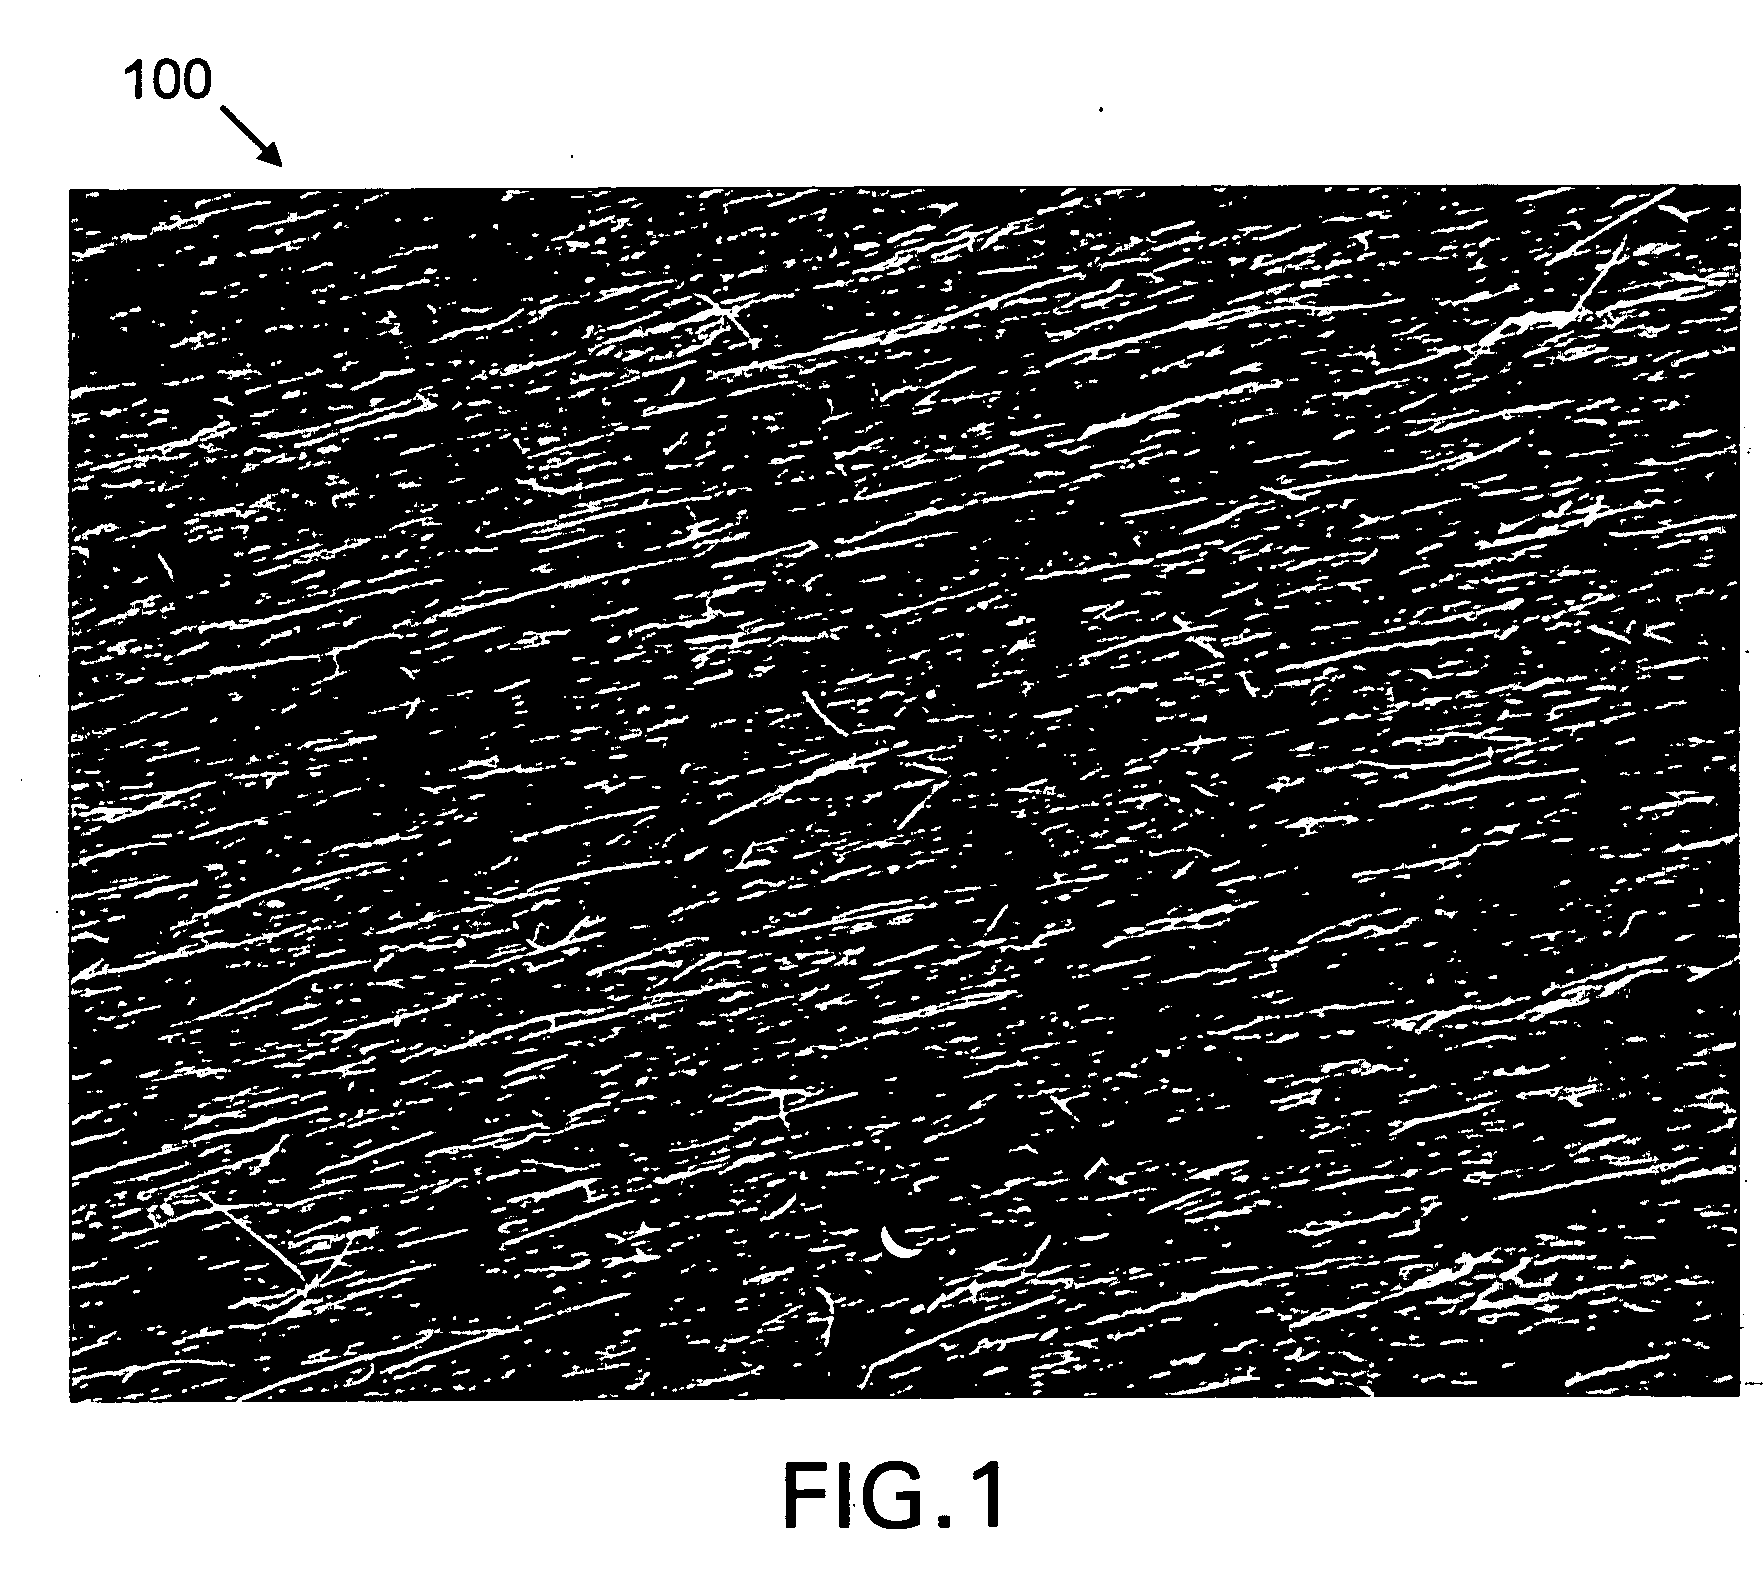 System and process for producing nanowire composites and electronic substrates therefrom